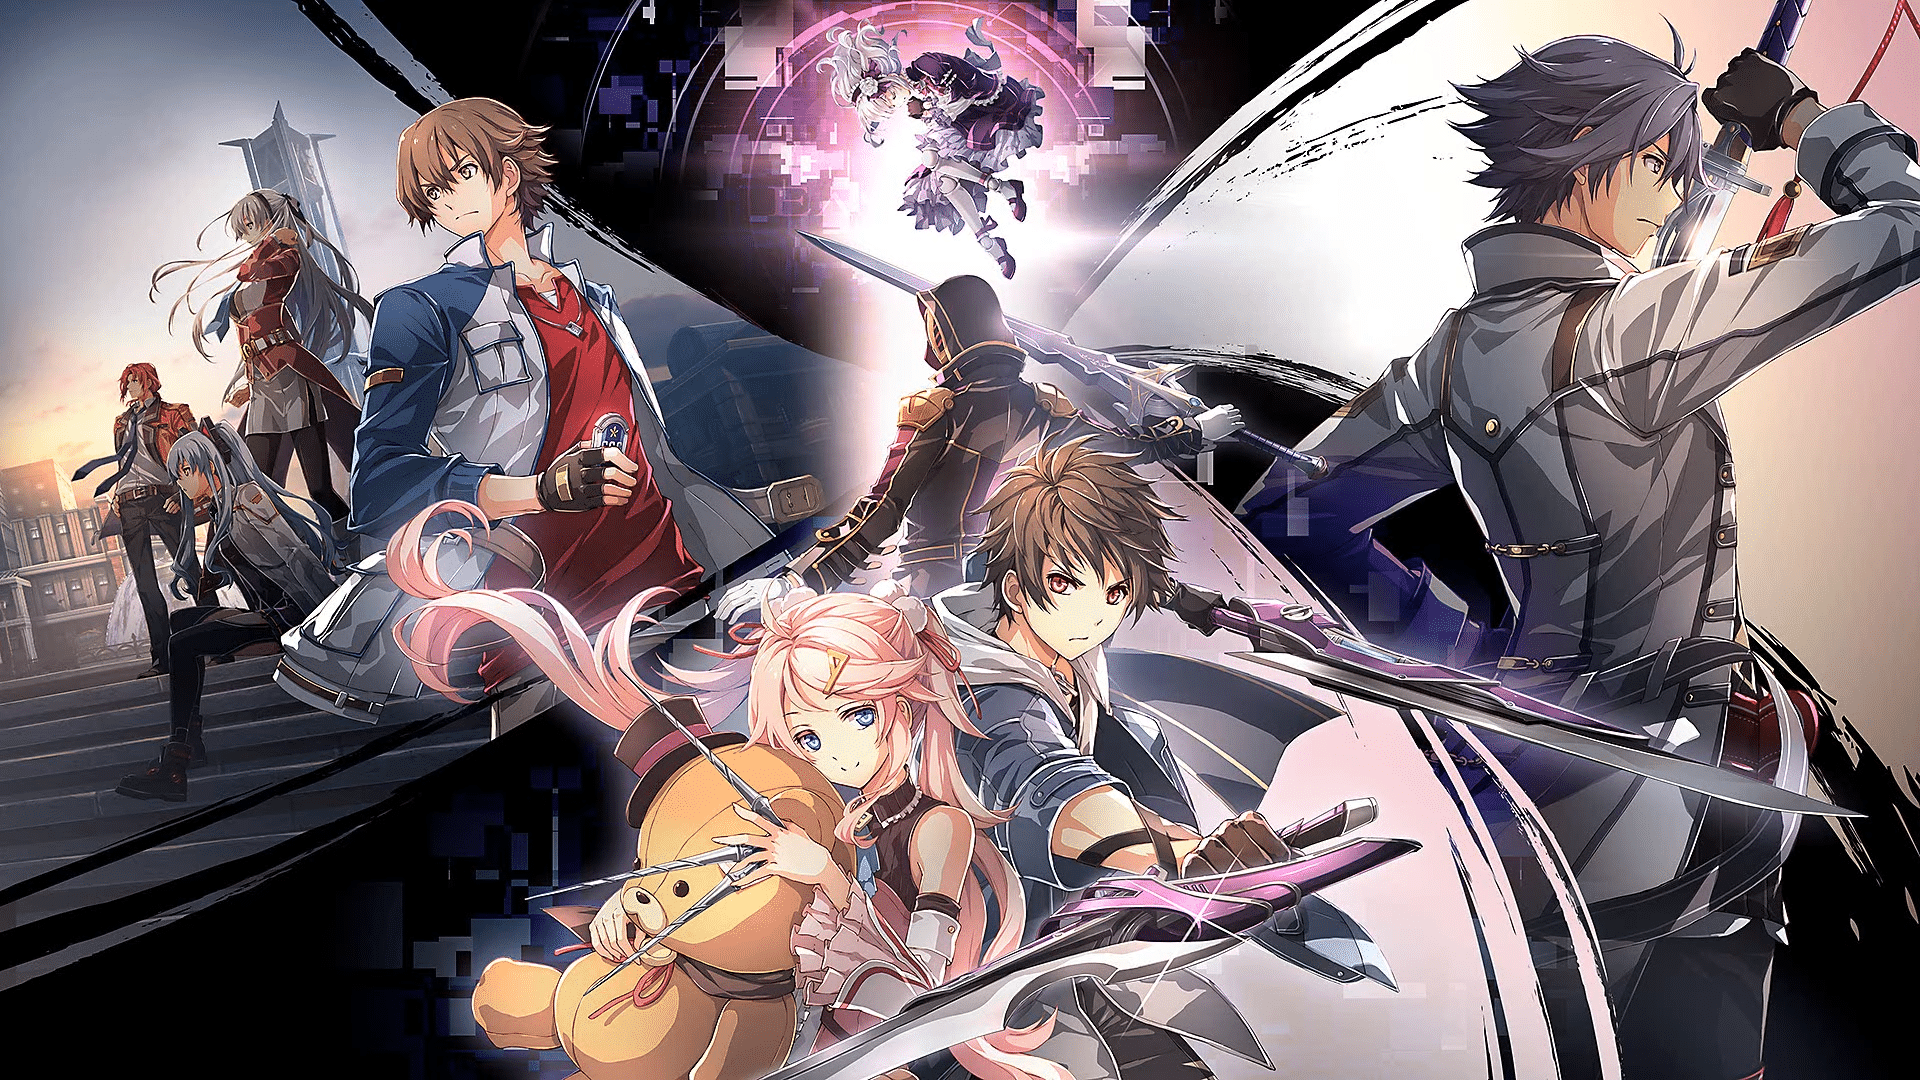 New Falcom President Toshihiro Kondo Interview Grants Thought-Provoking Insights